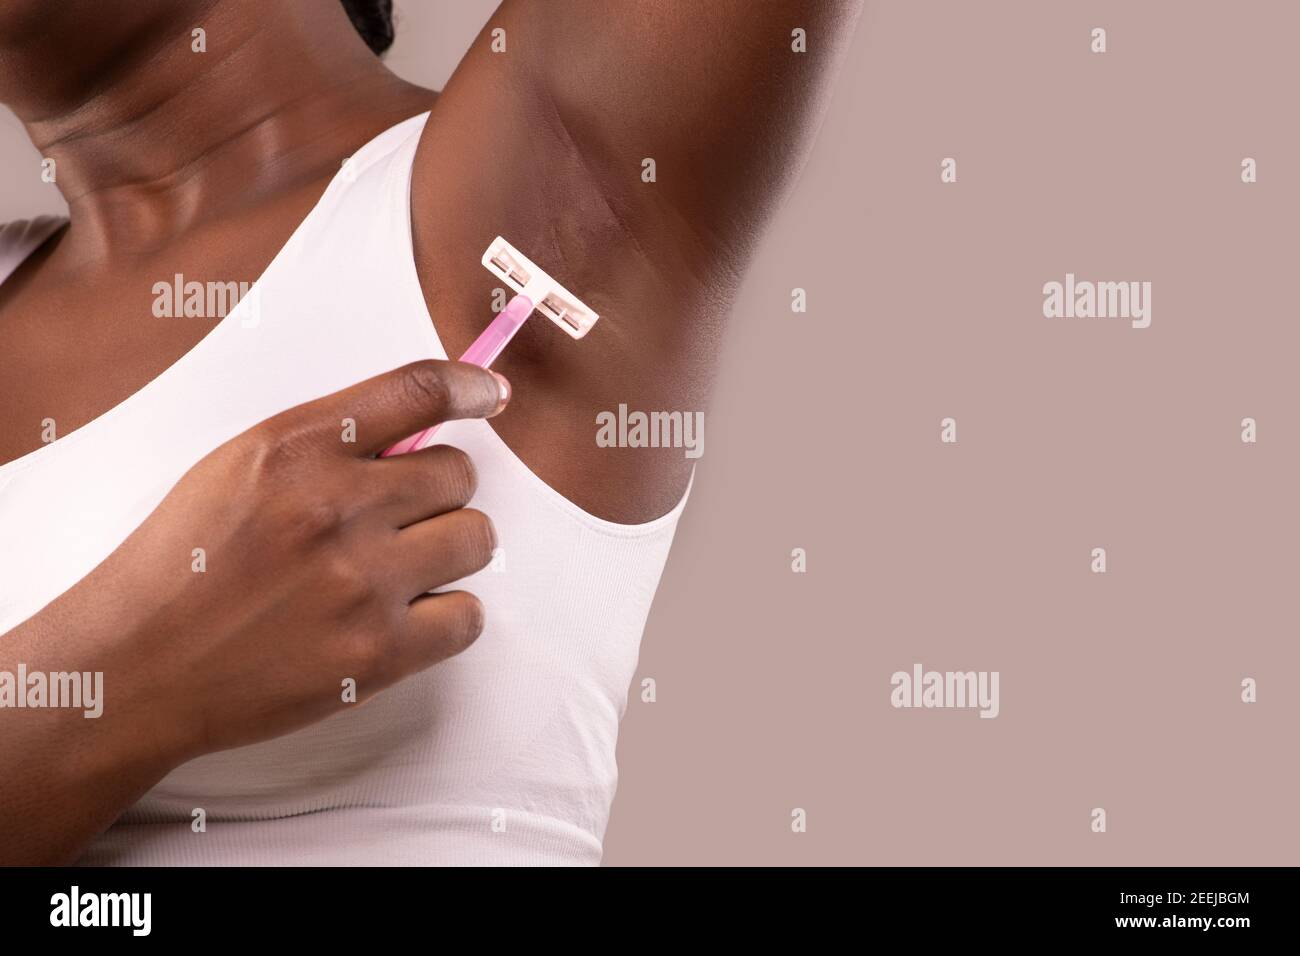 Hair Removal. Unrecognizable Black Woman Shaving Her Armpit With Pink Razor Stock Photo